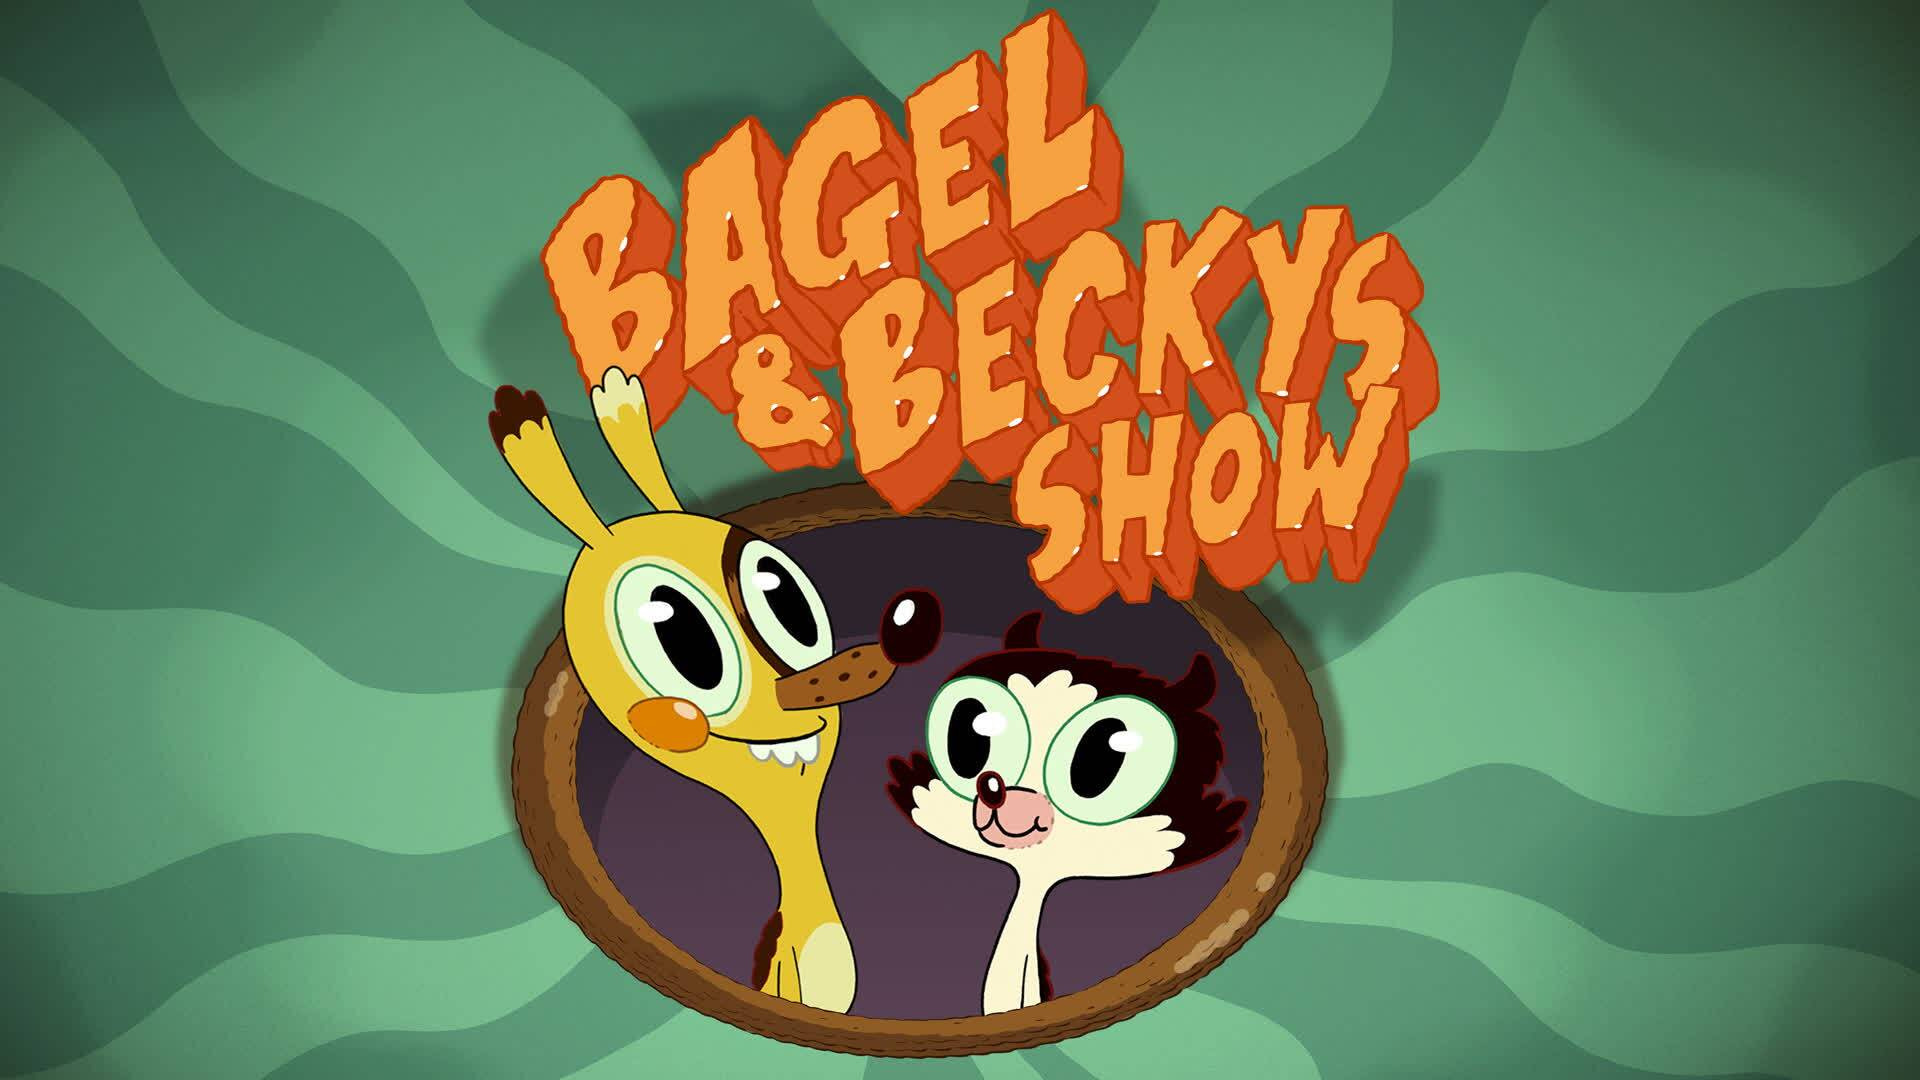 Show The Bagel and Becky Show